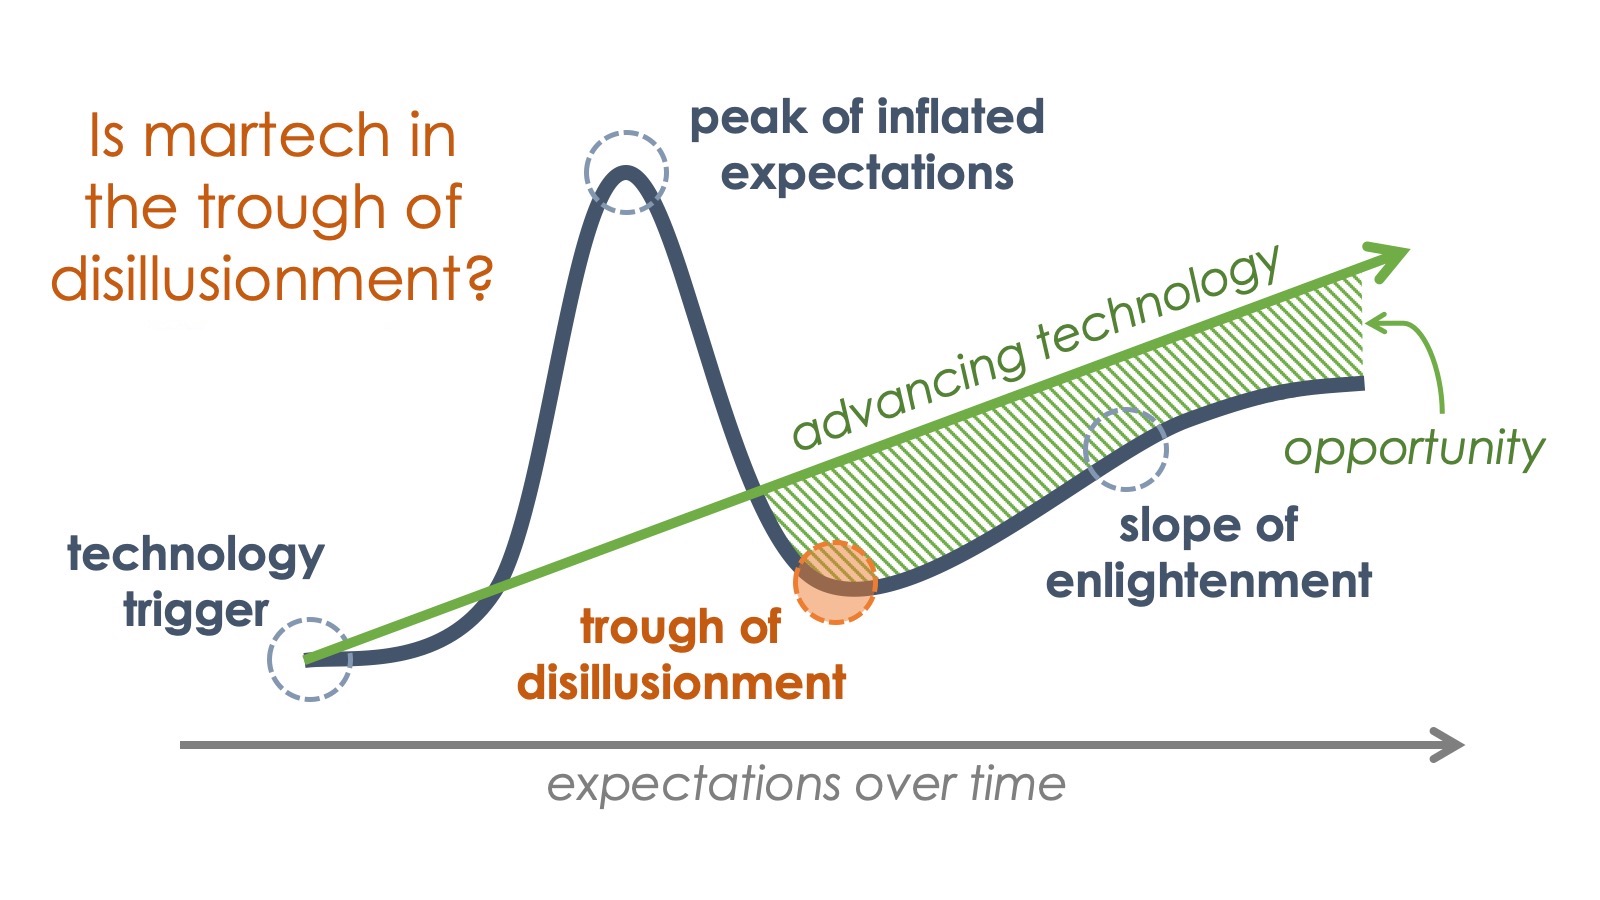 Martech in the Trough of Disillusionment?